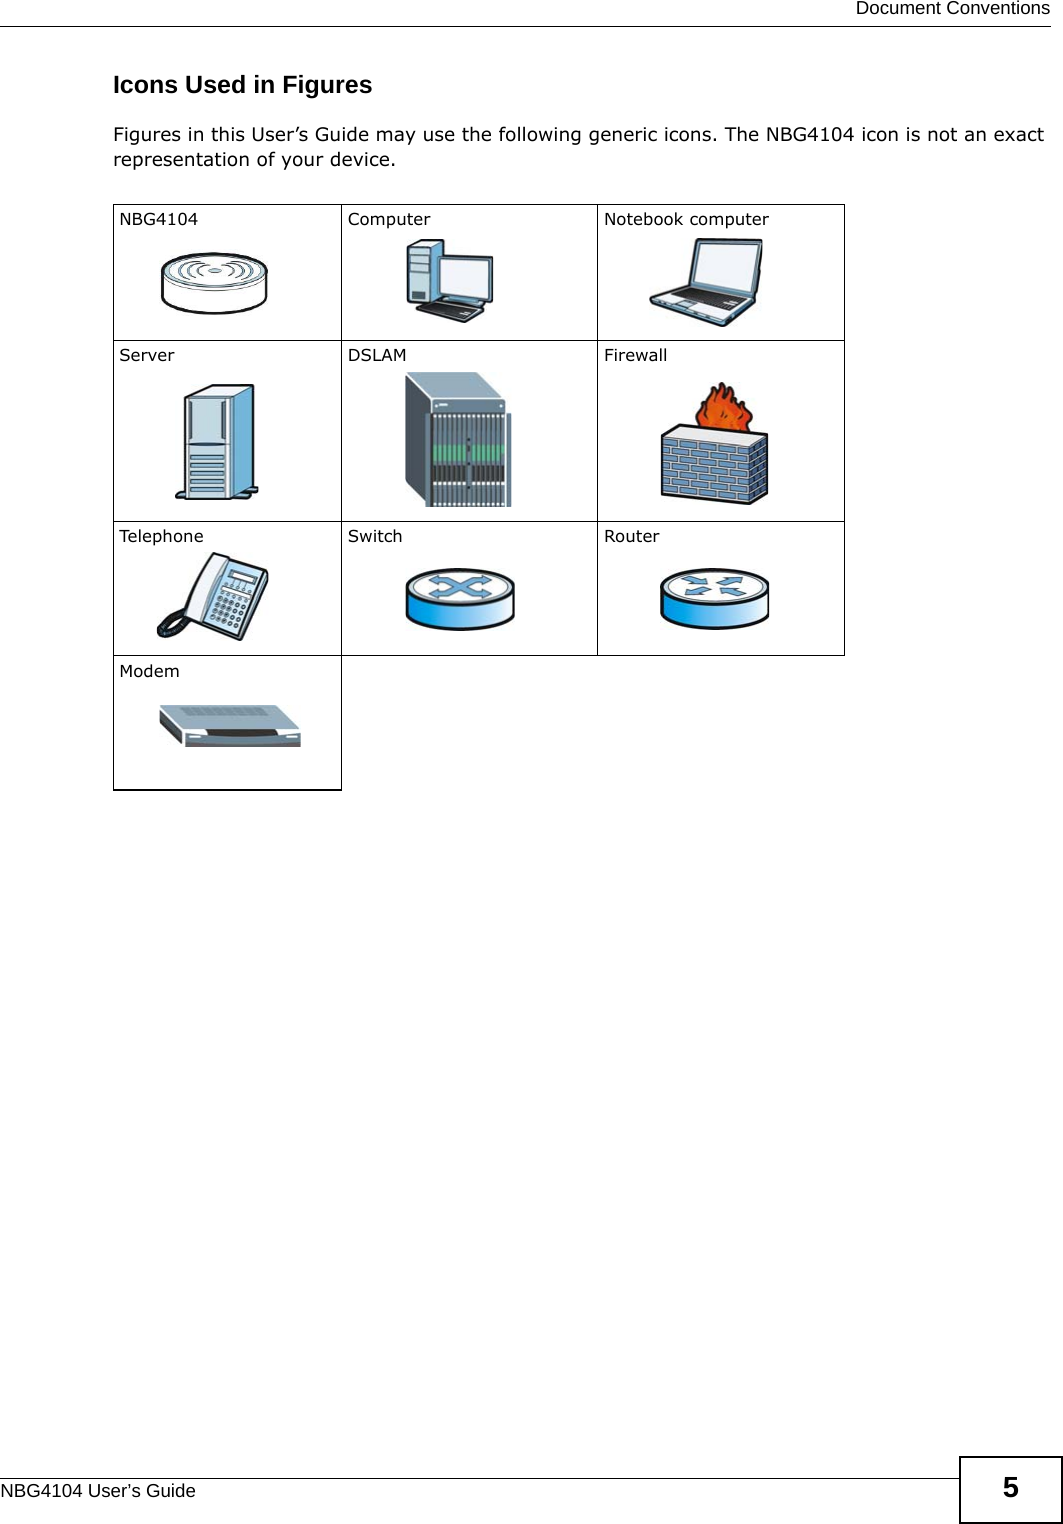  Document ConventionsNBG4104 User’s Guide 5Icons Used in FiguresFigures in this User’s Guide may use the following generic icons. The NBG4104 icon is not an exact representation of your device.NBG4104 Computer Notebook computerServer DSLAM FirewallTelephone Switch RouterModem